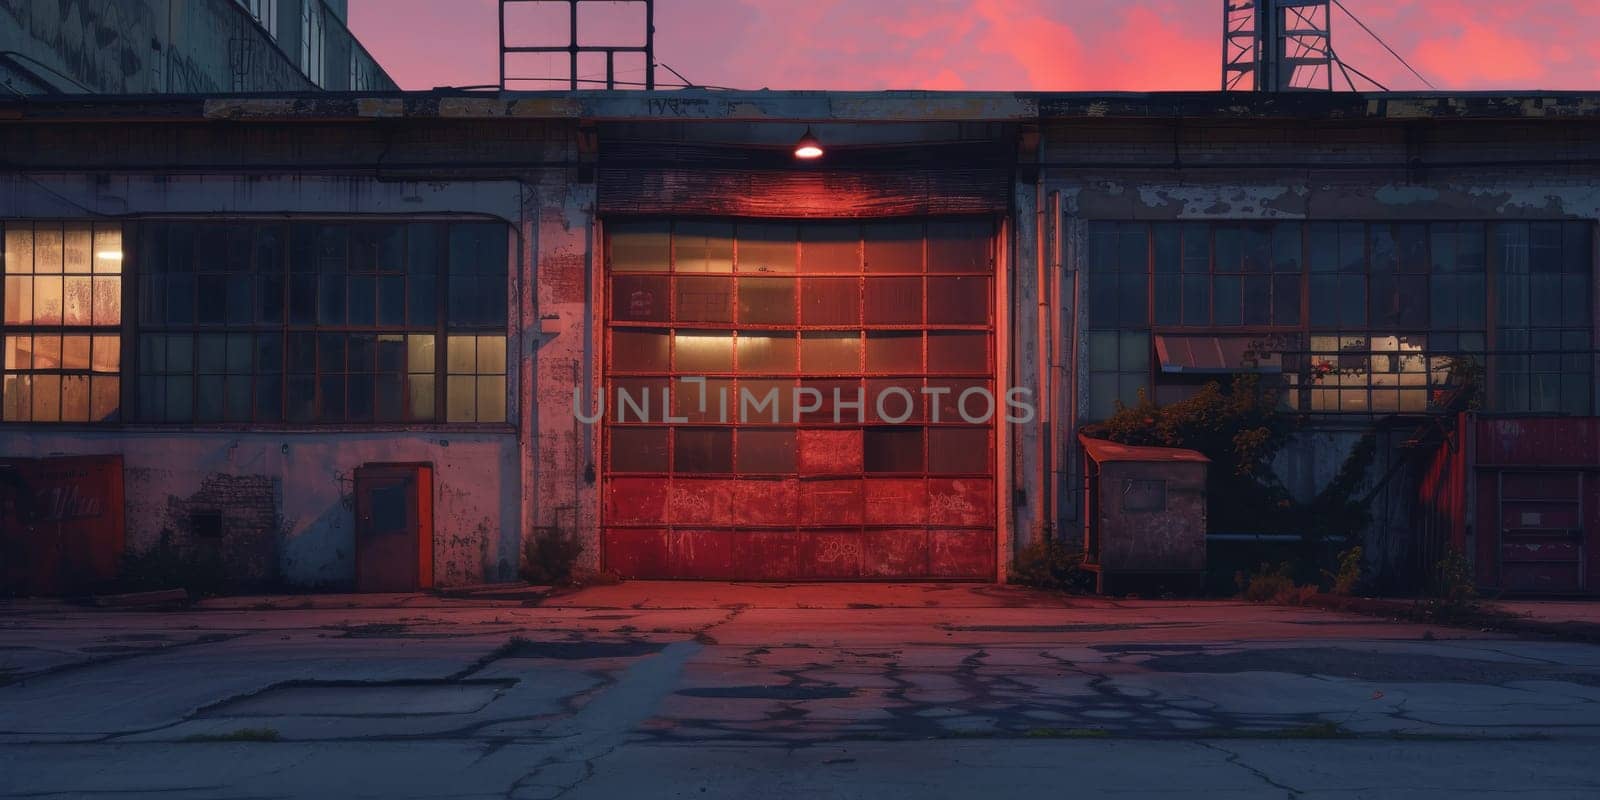 Old brick building with a single red light glowing in a window